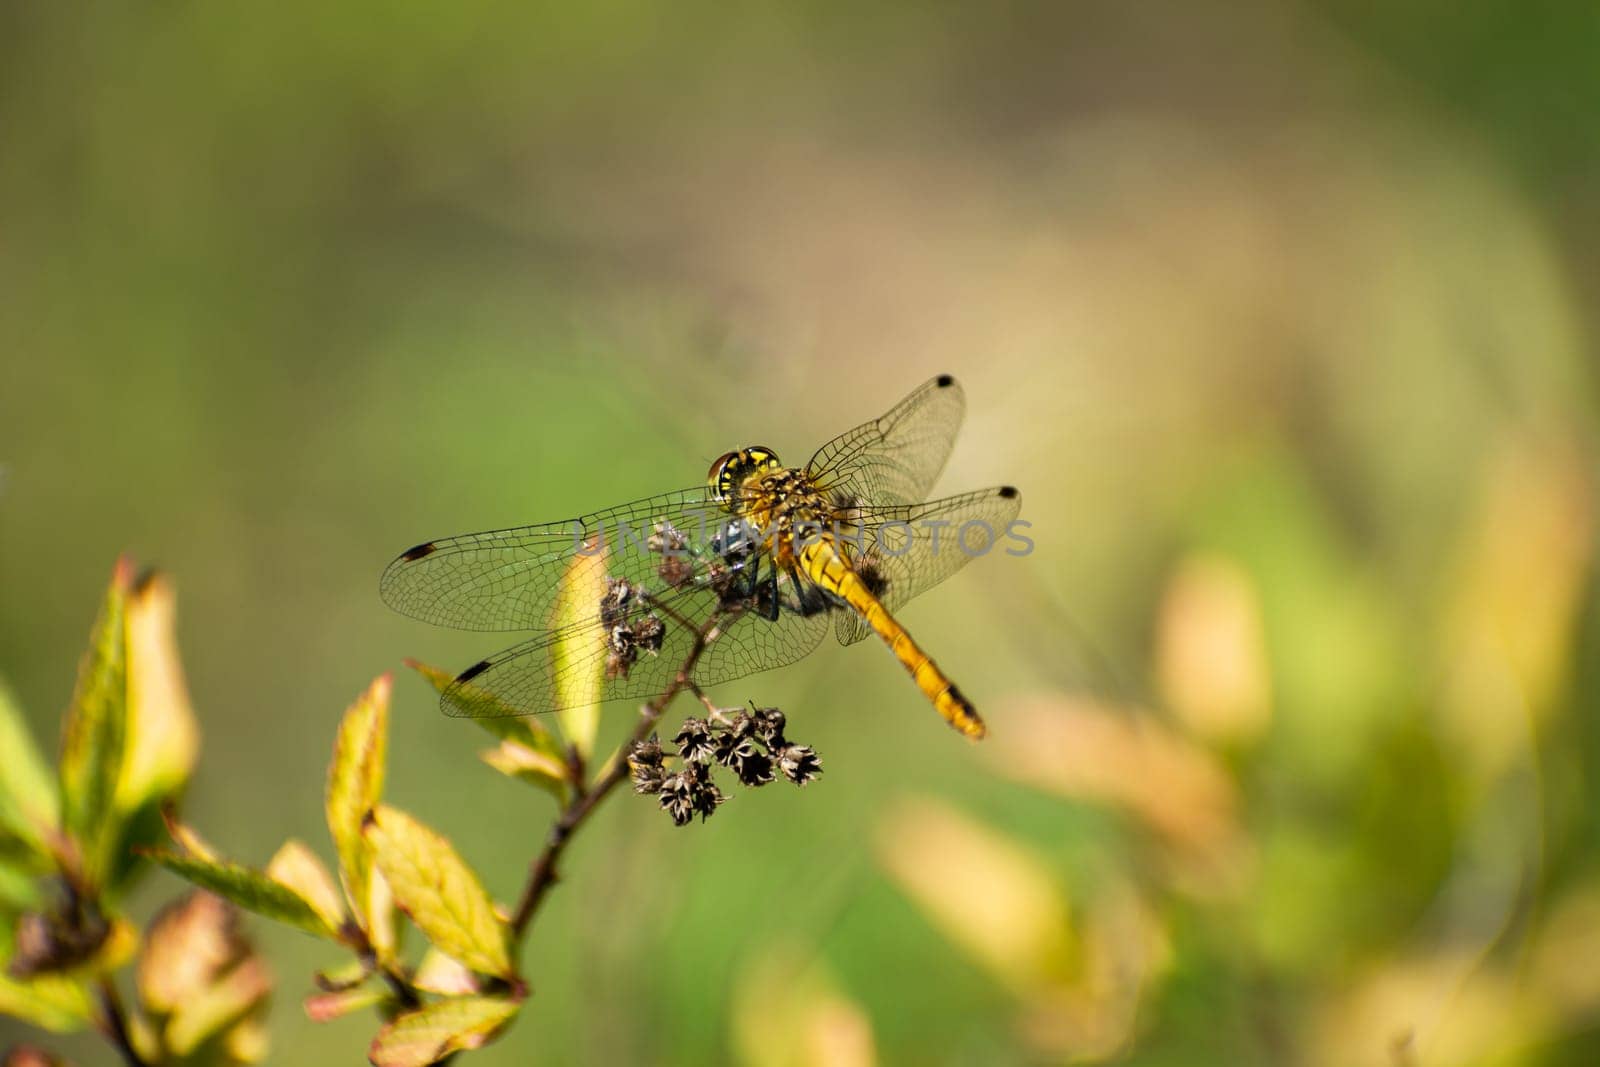 One yellow dragonfly sitting on a plant, summer day